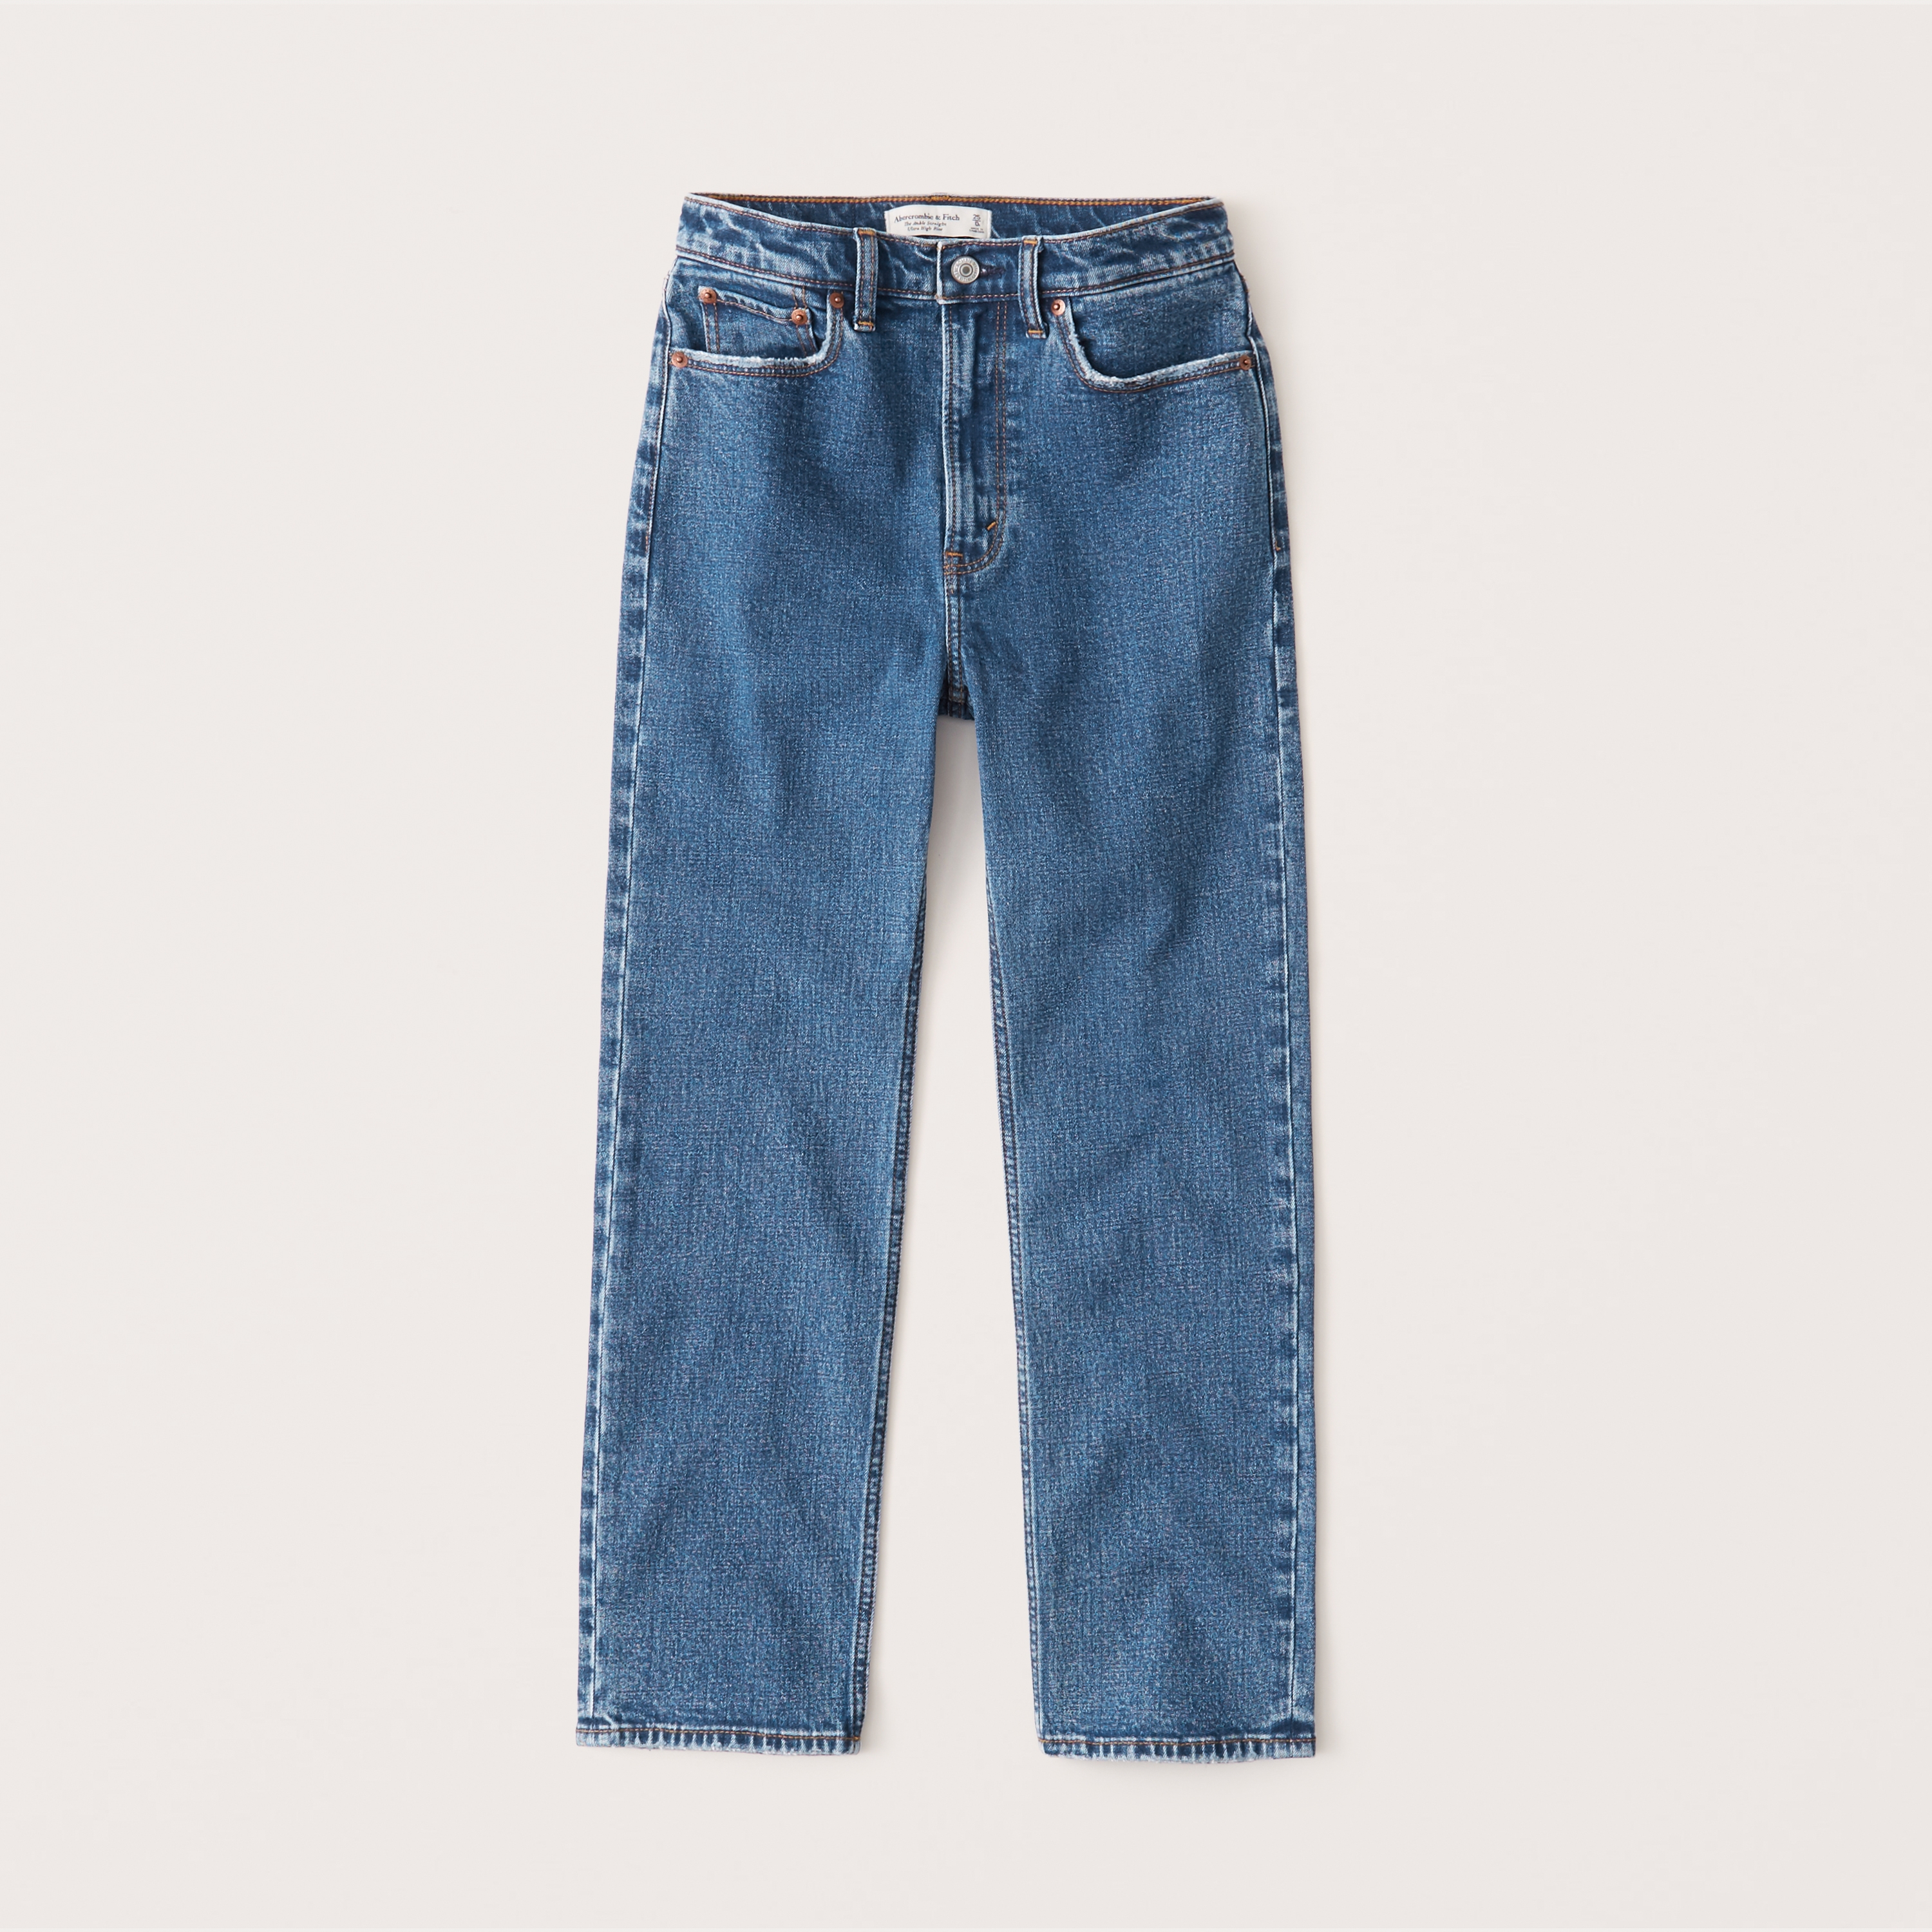 abercrombie fitch zoe jeans